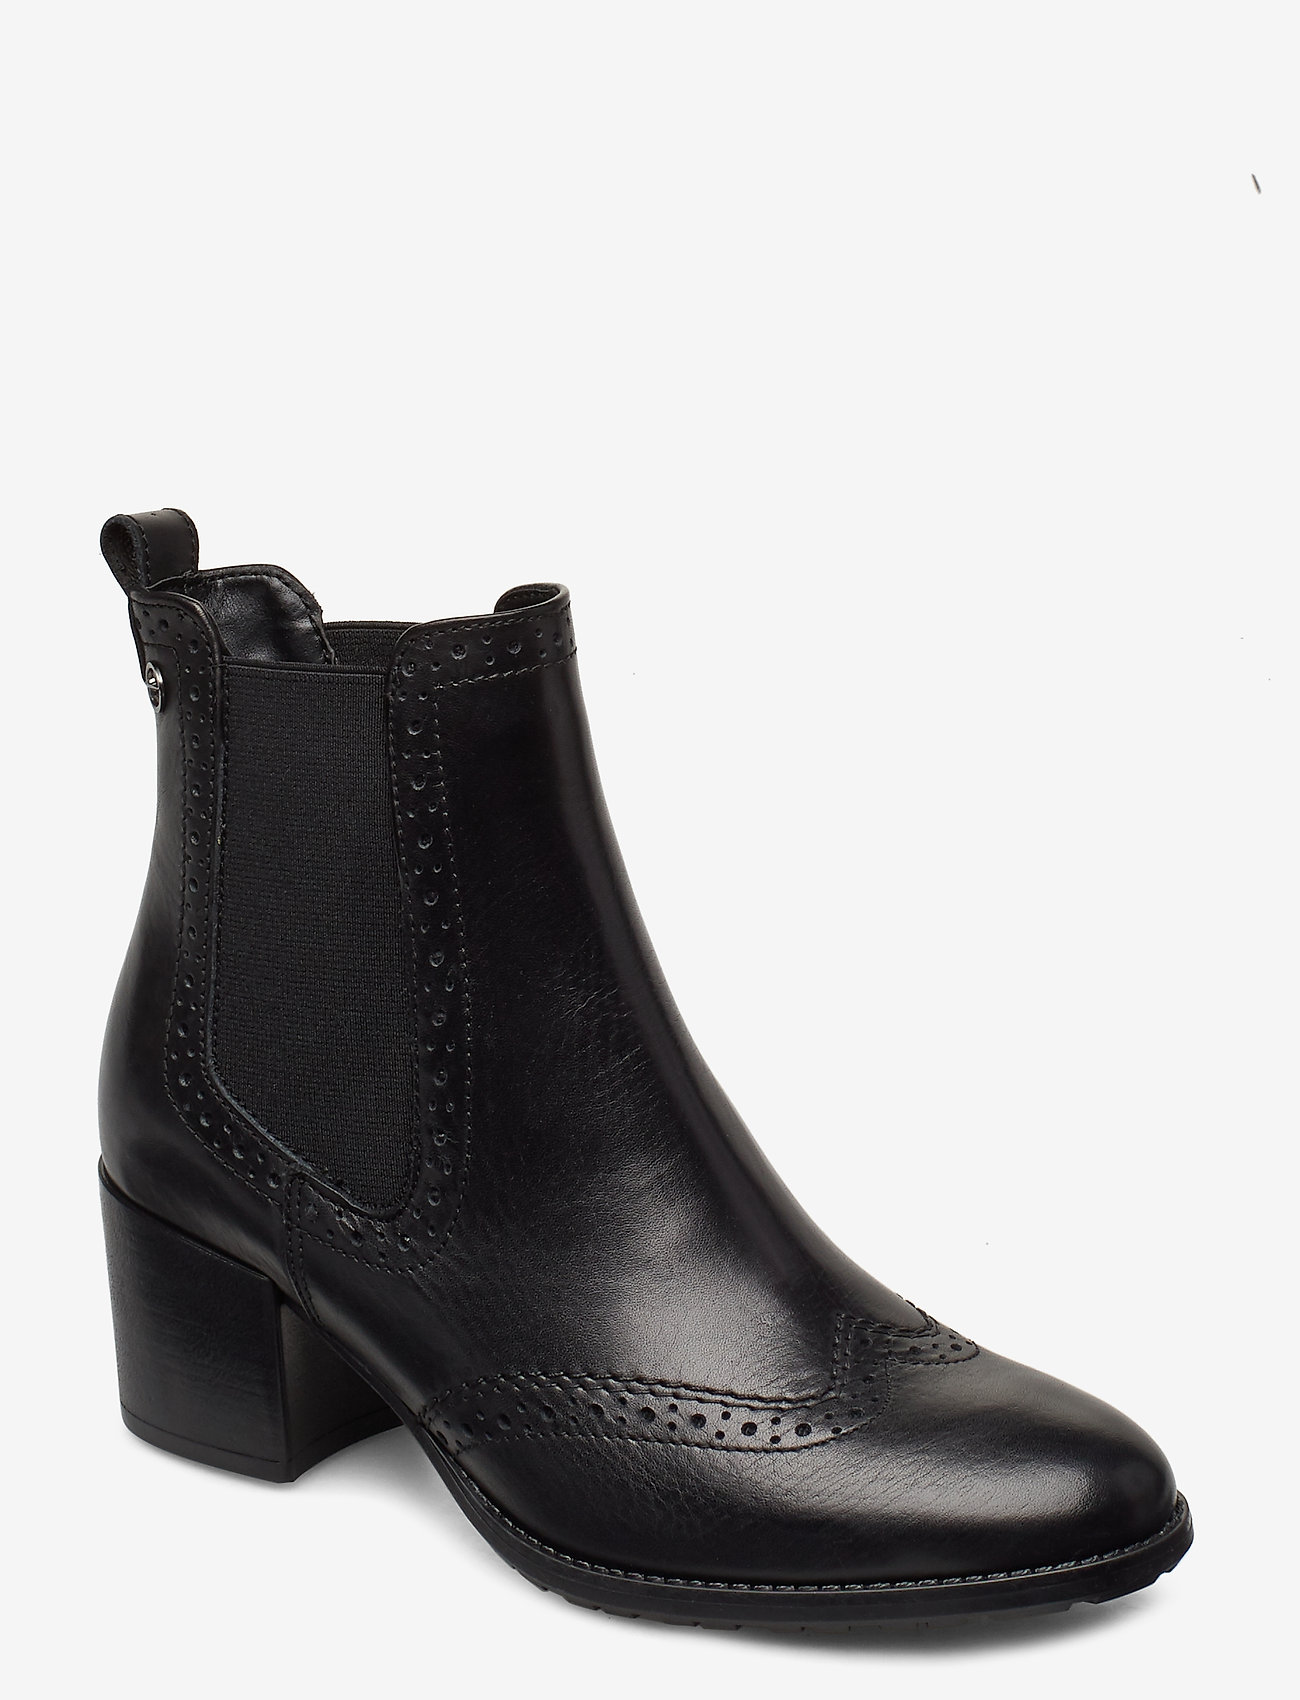 Woms Boots (Black Leather) (59.96 